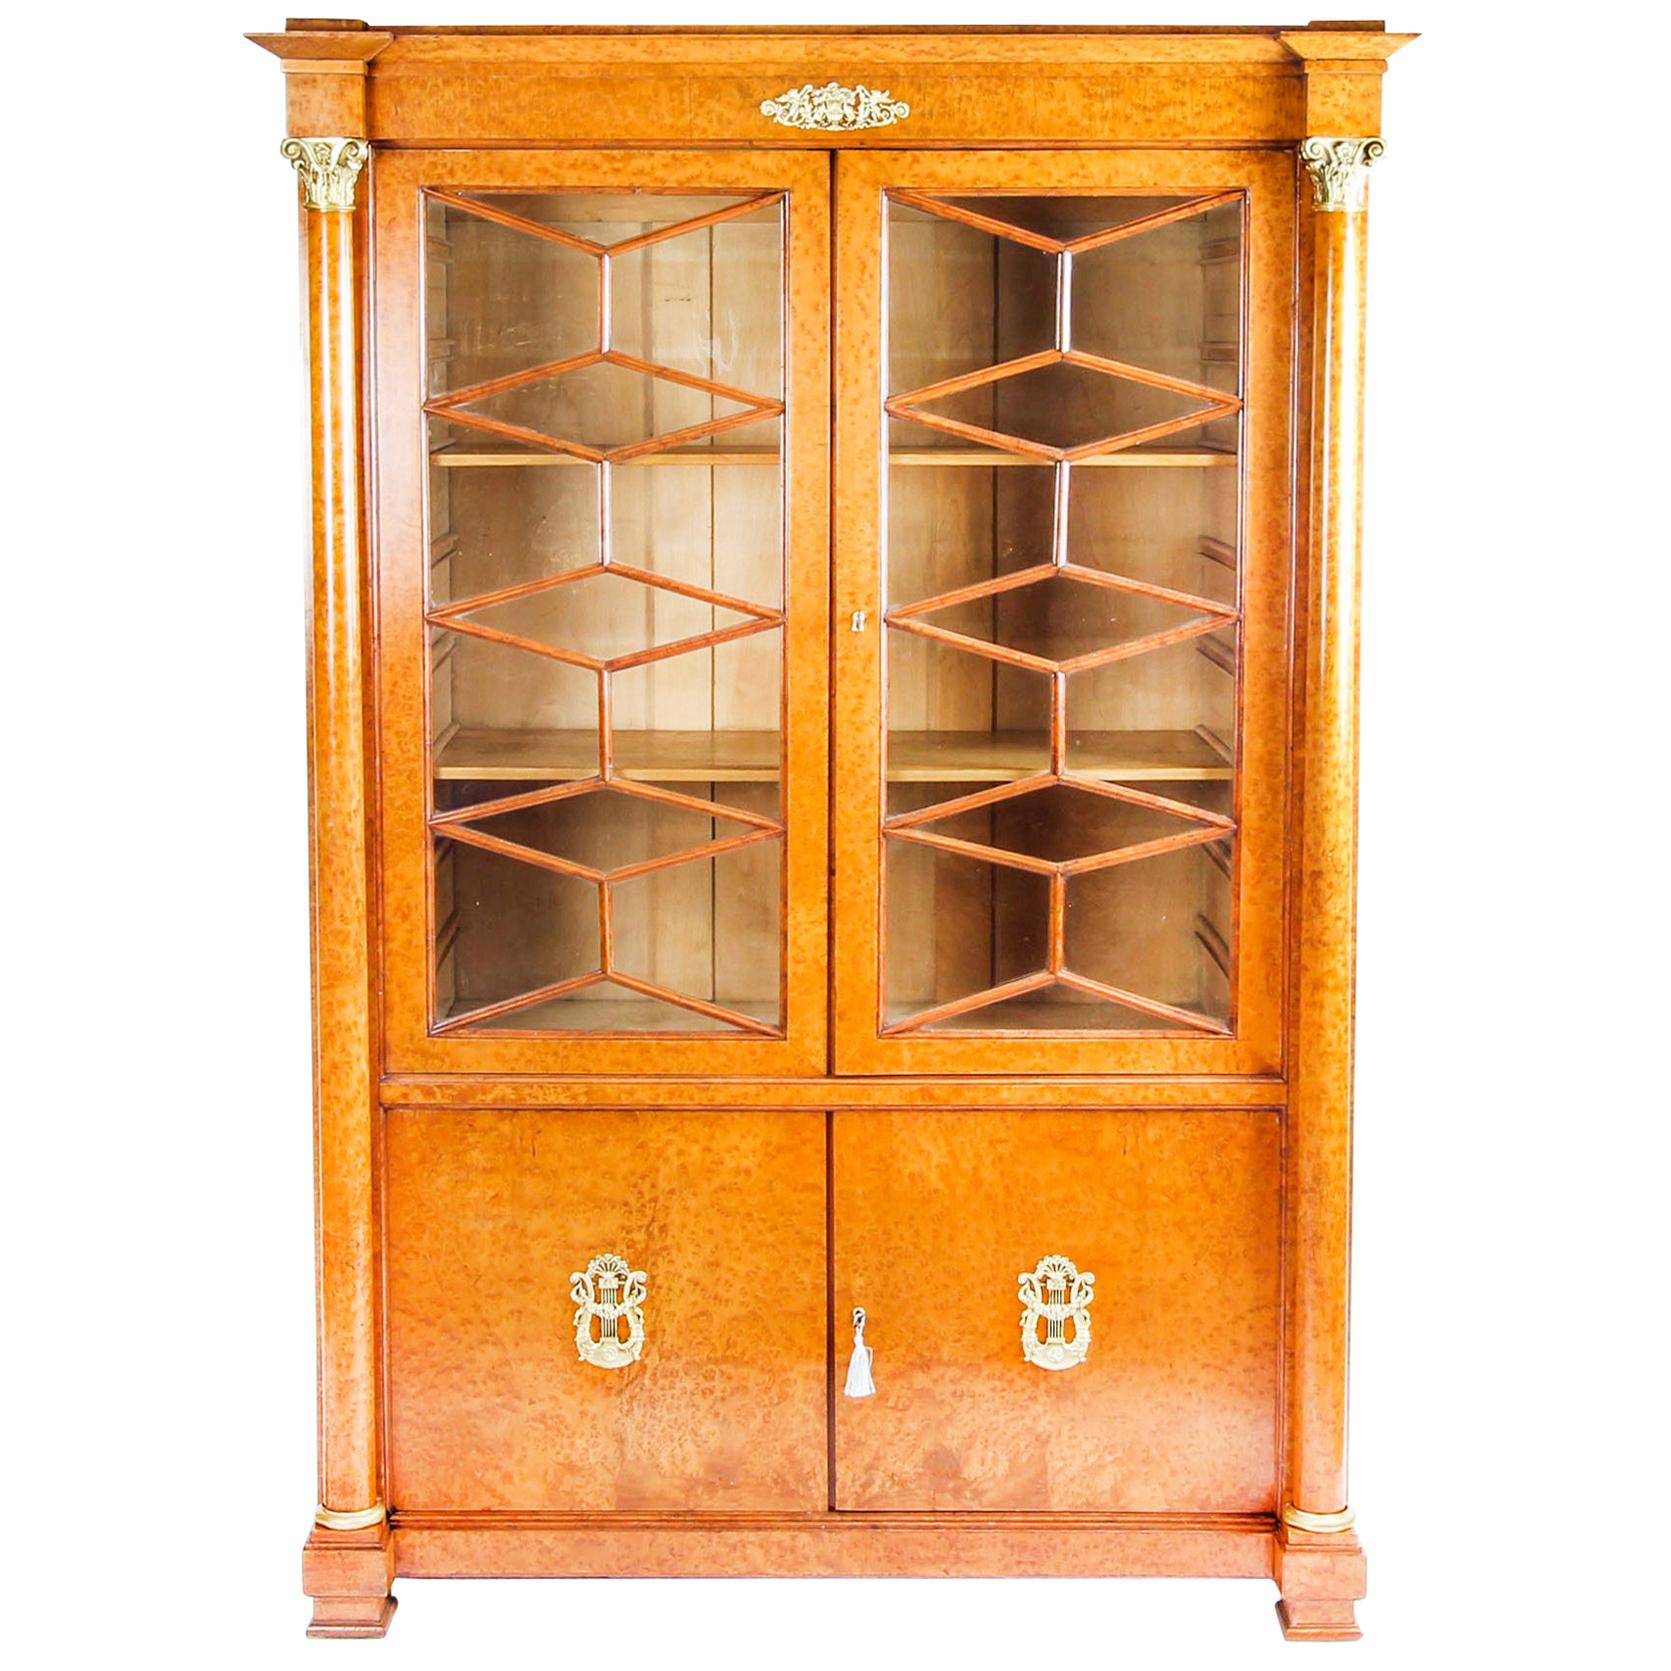 Antique French Charles X Burr Maple and Ormolu Bookcase, 19th Century For Sale